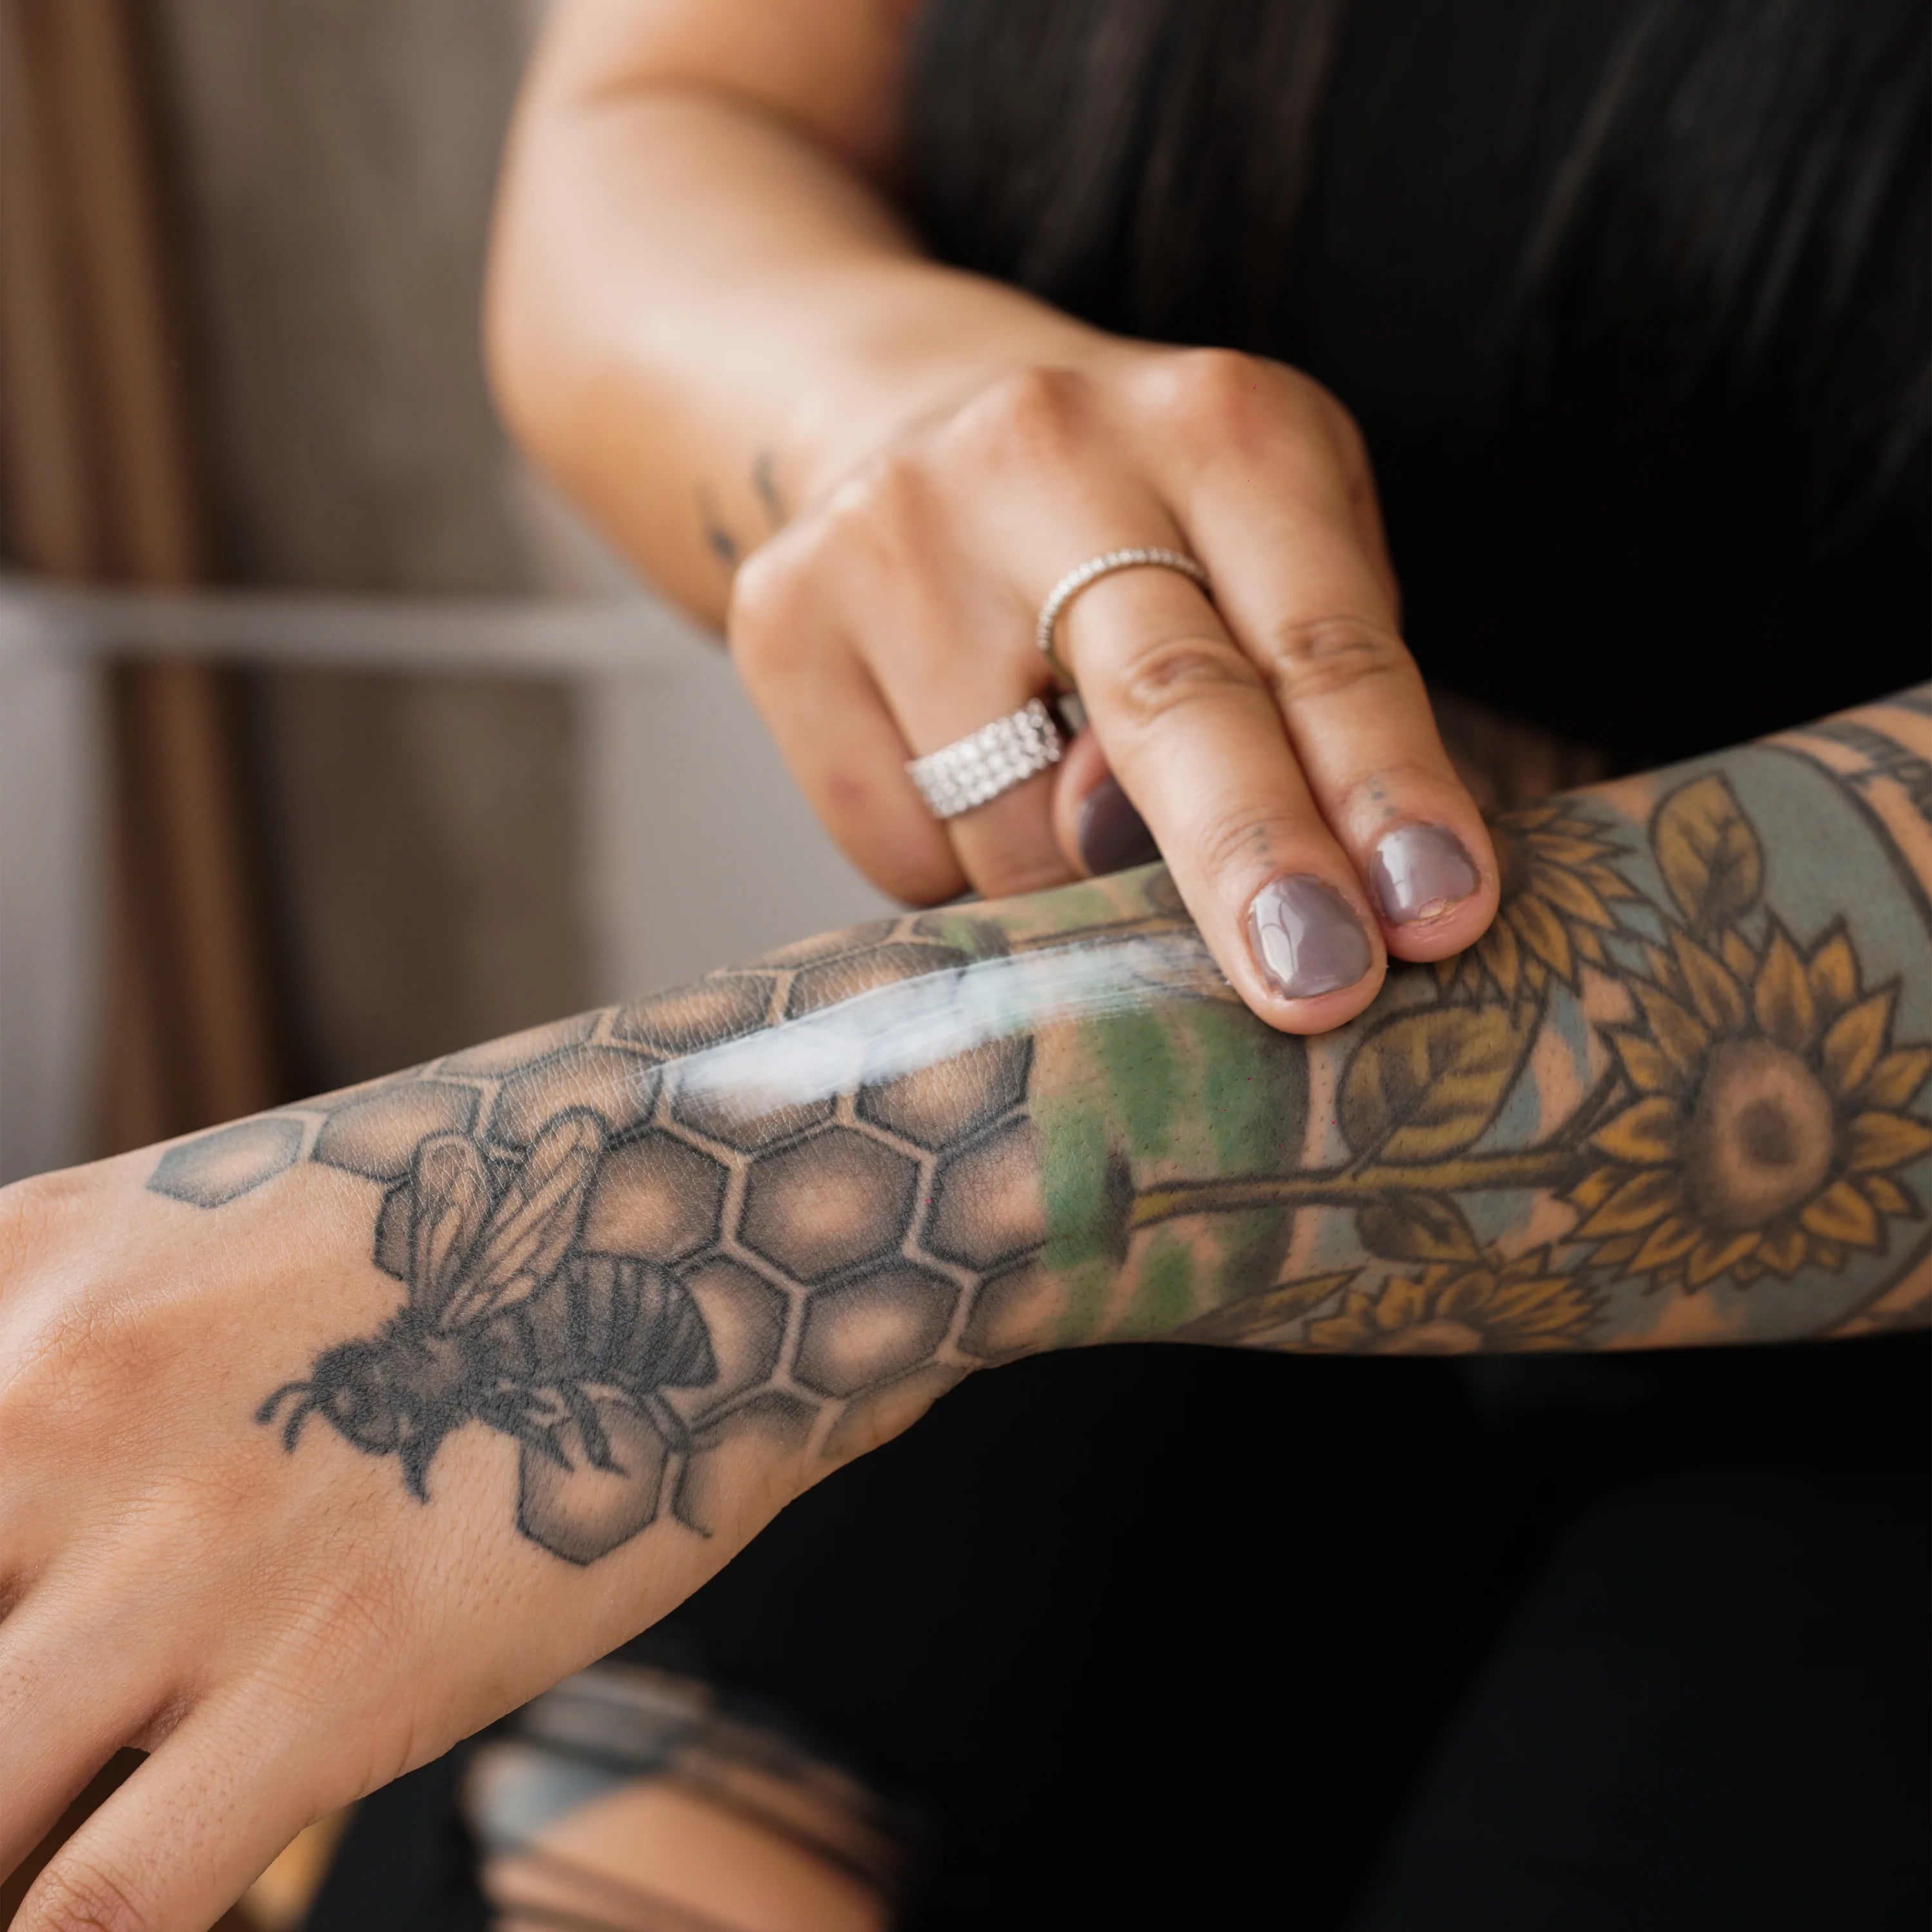 Tattoo Lotion: How To Choose the Best of the Best